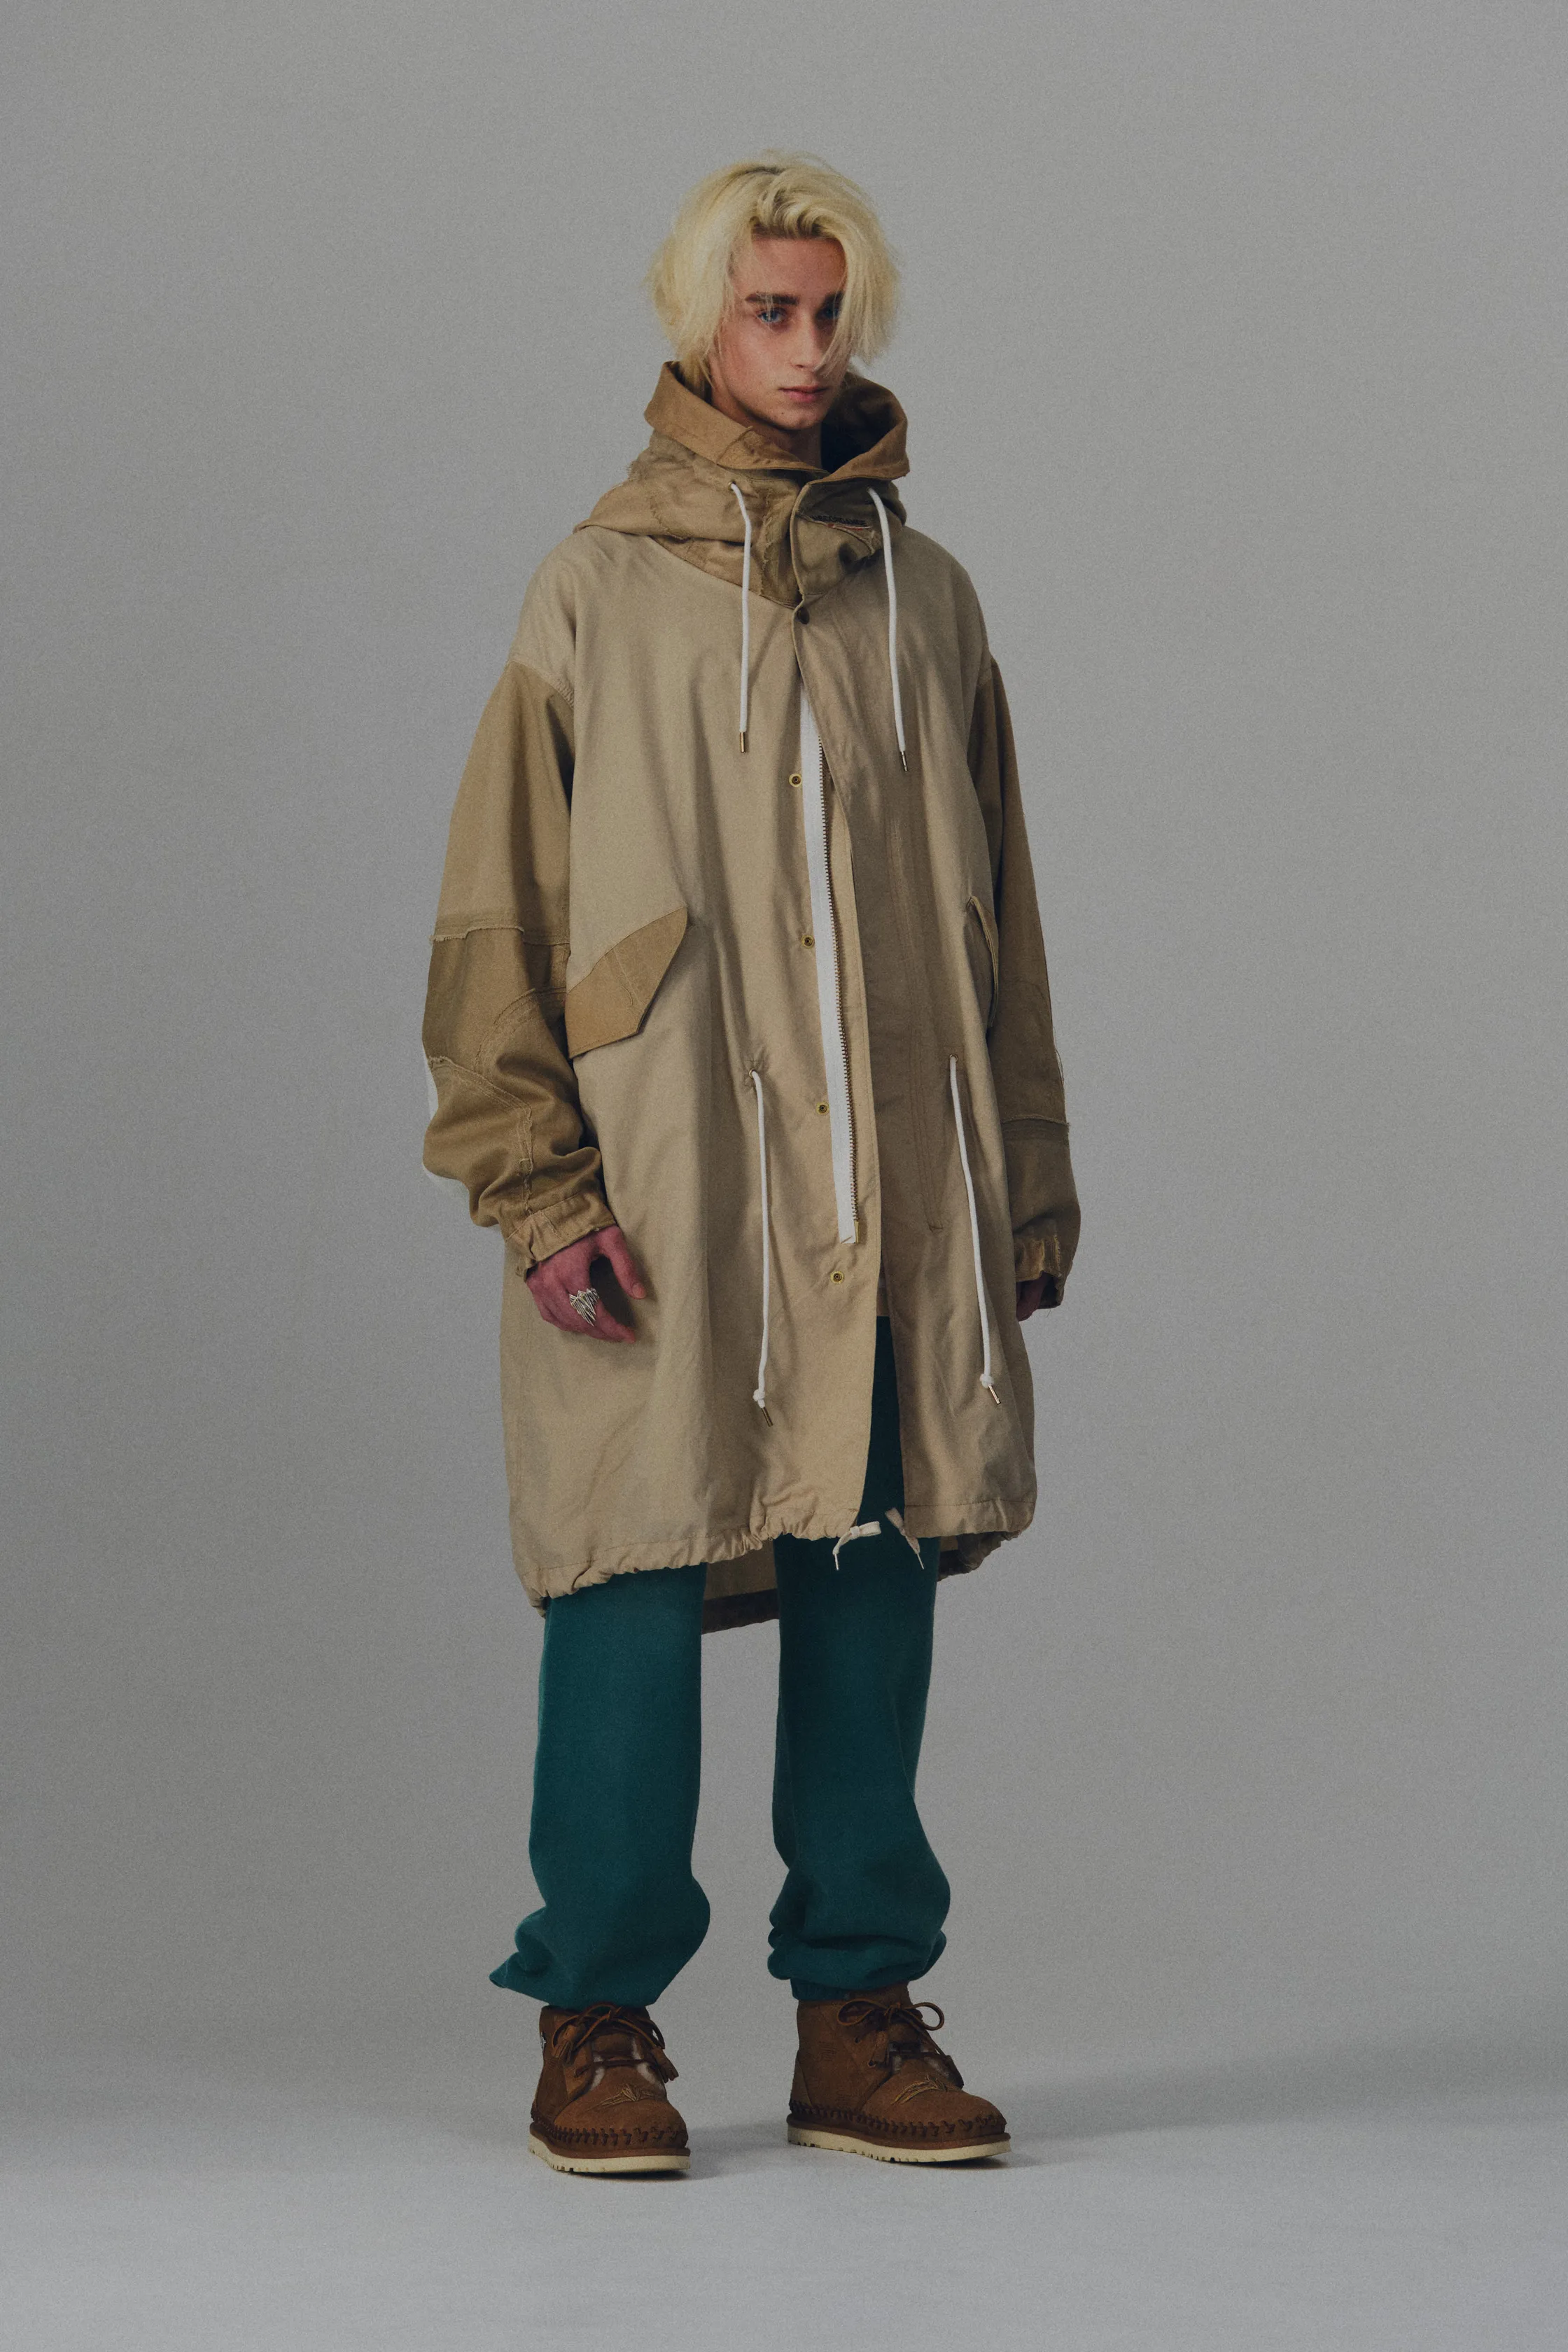 00030-Children-of-the-Discordance-Mens-Fall-22-credit-brand.png